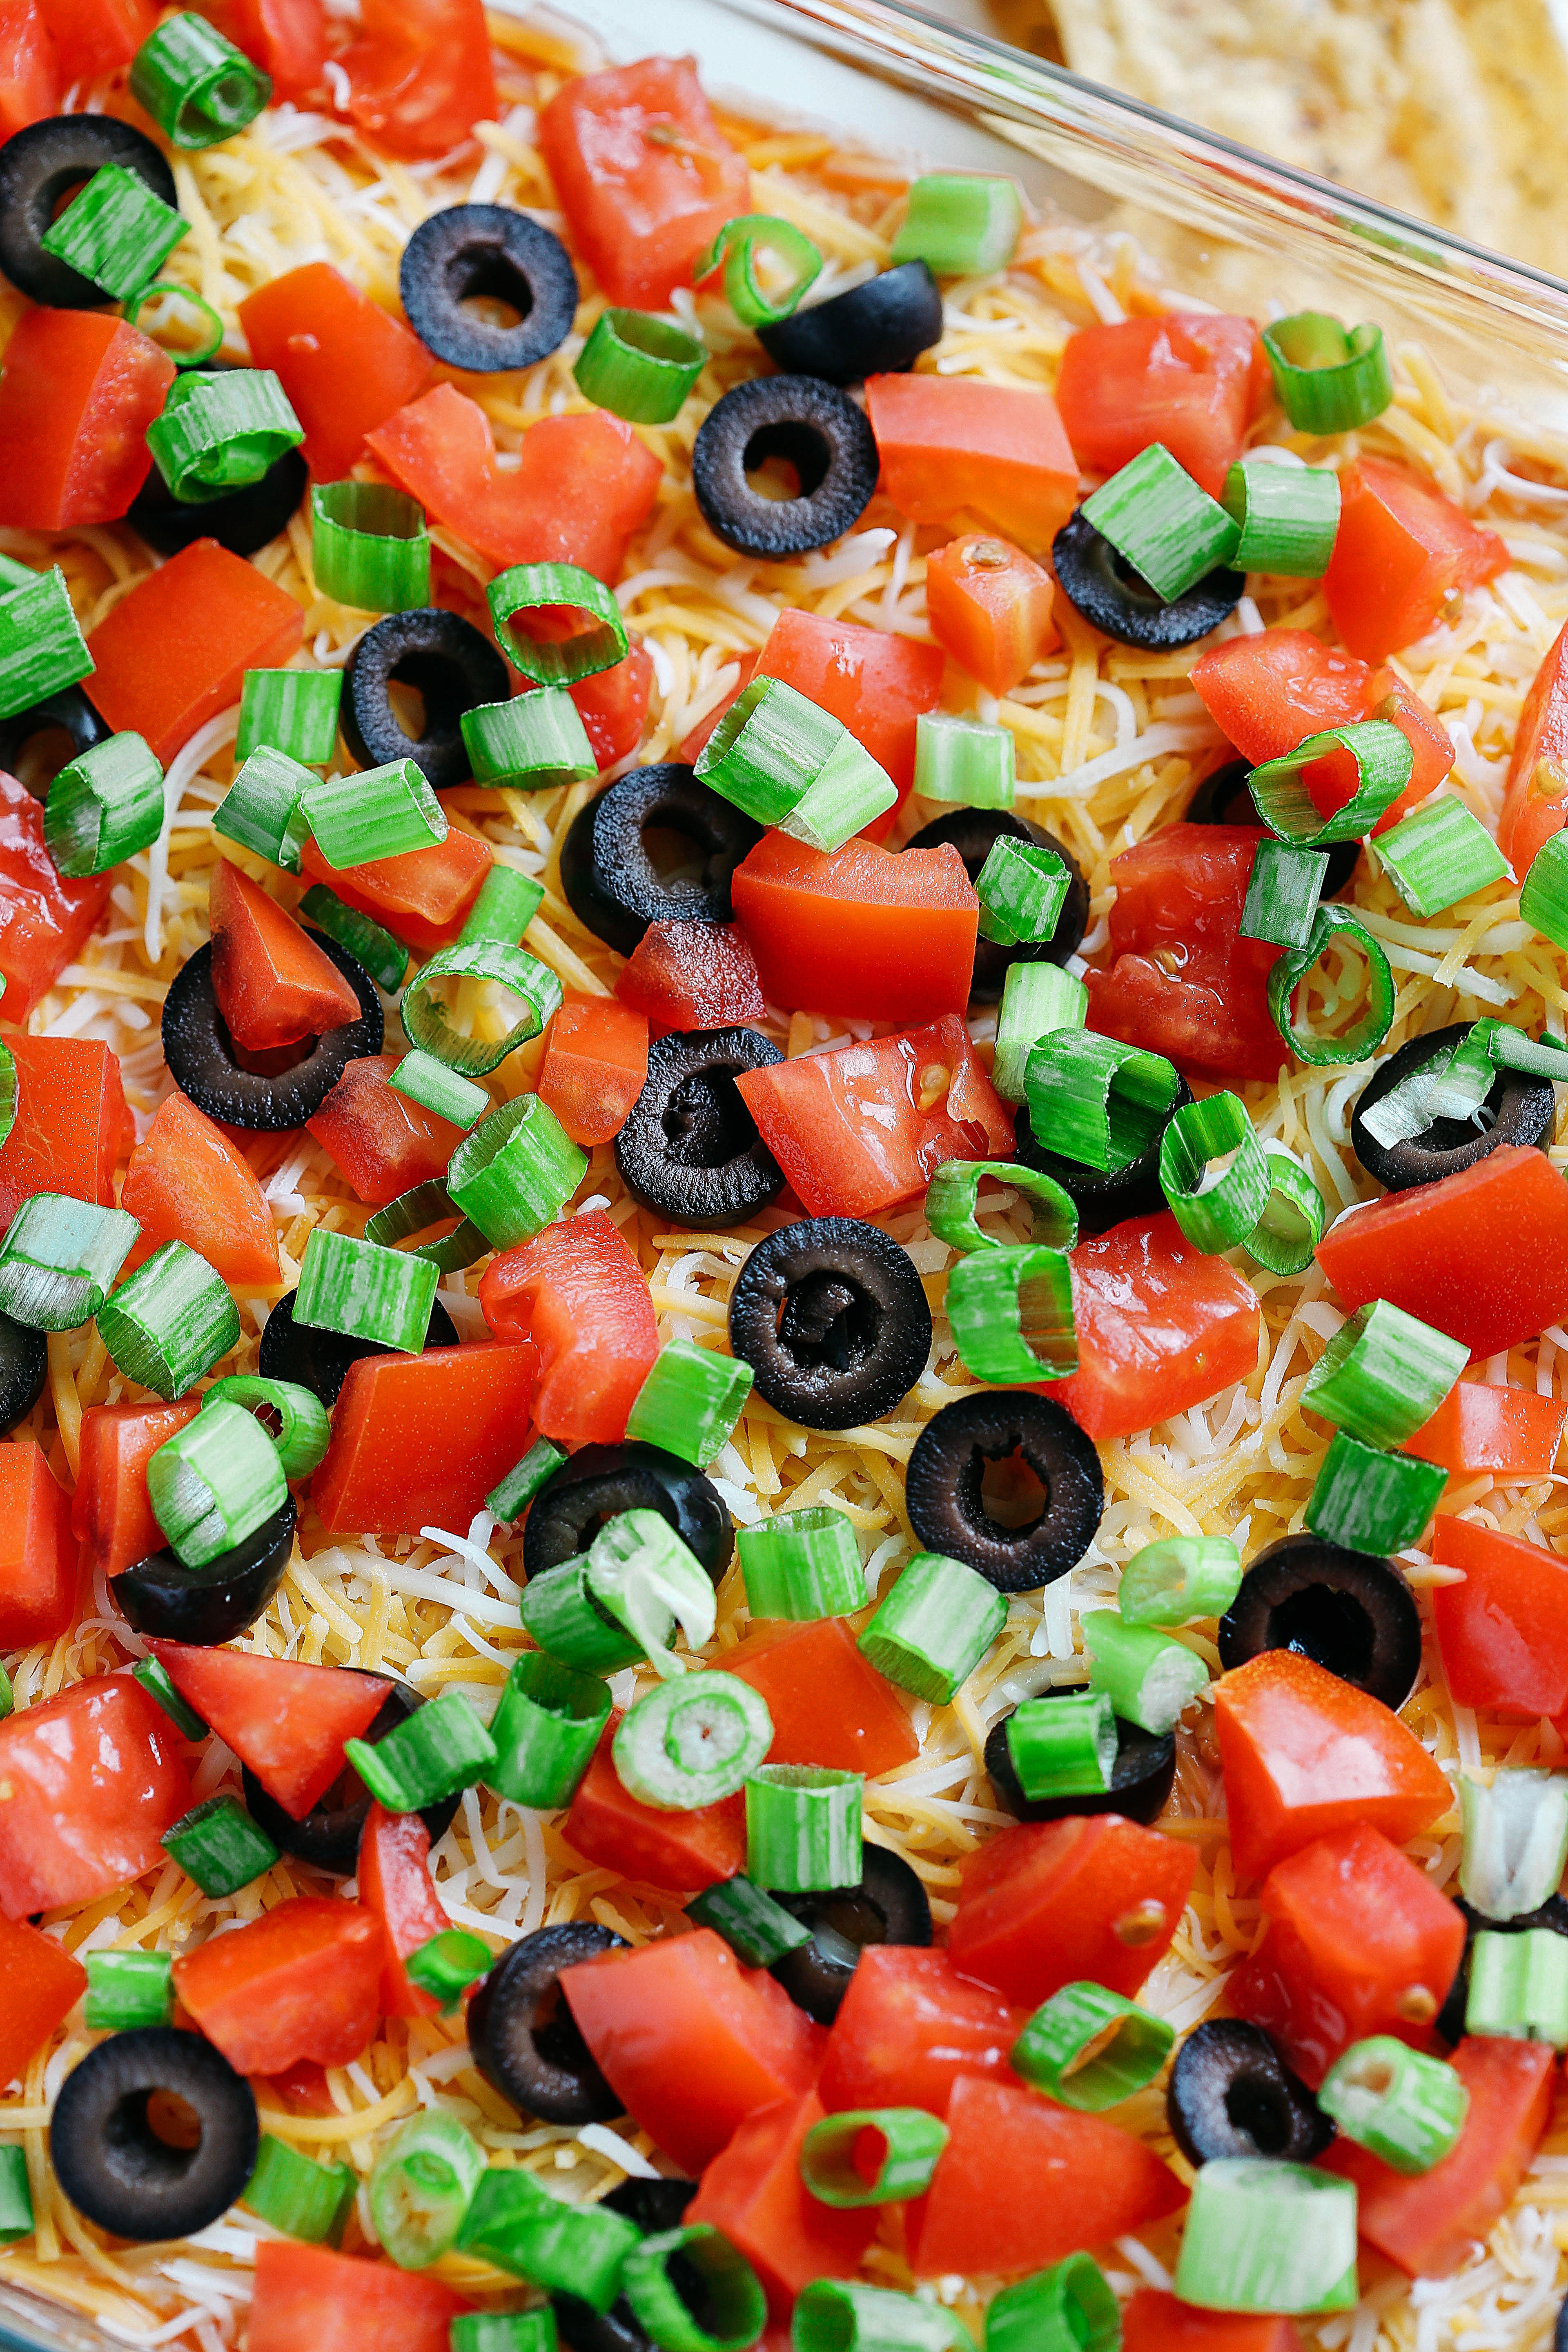 This Healthier 7 Layer Spicy Taco Dip is a lighter take on your favorite party appetizer perfect for any gathering or event that you can enjoy guilt-free!